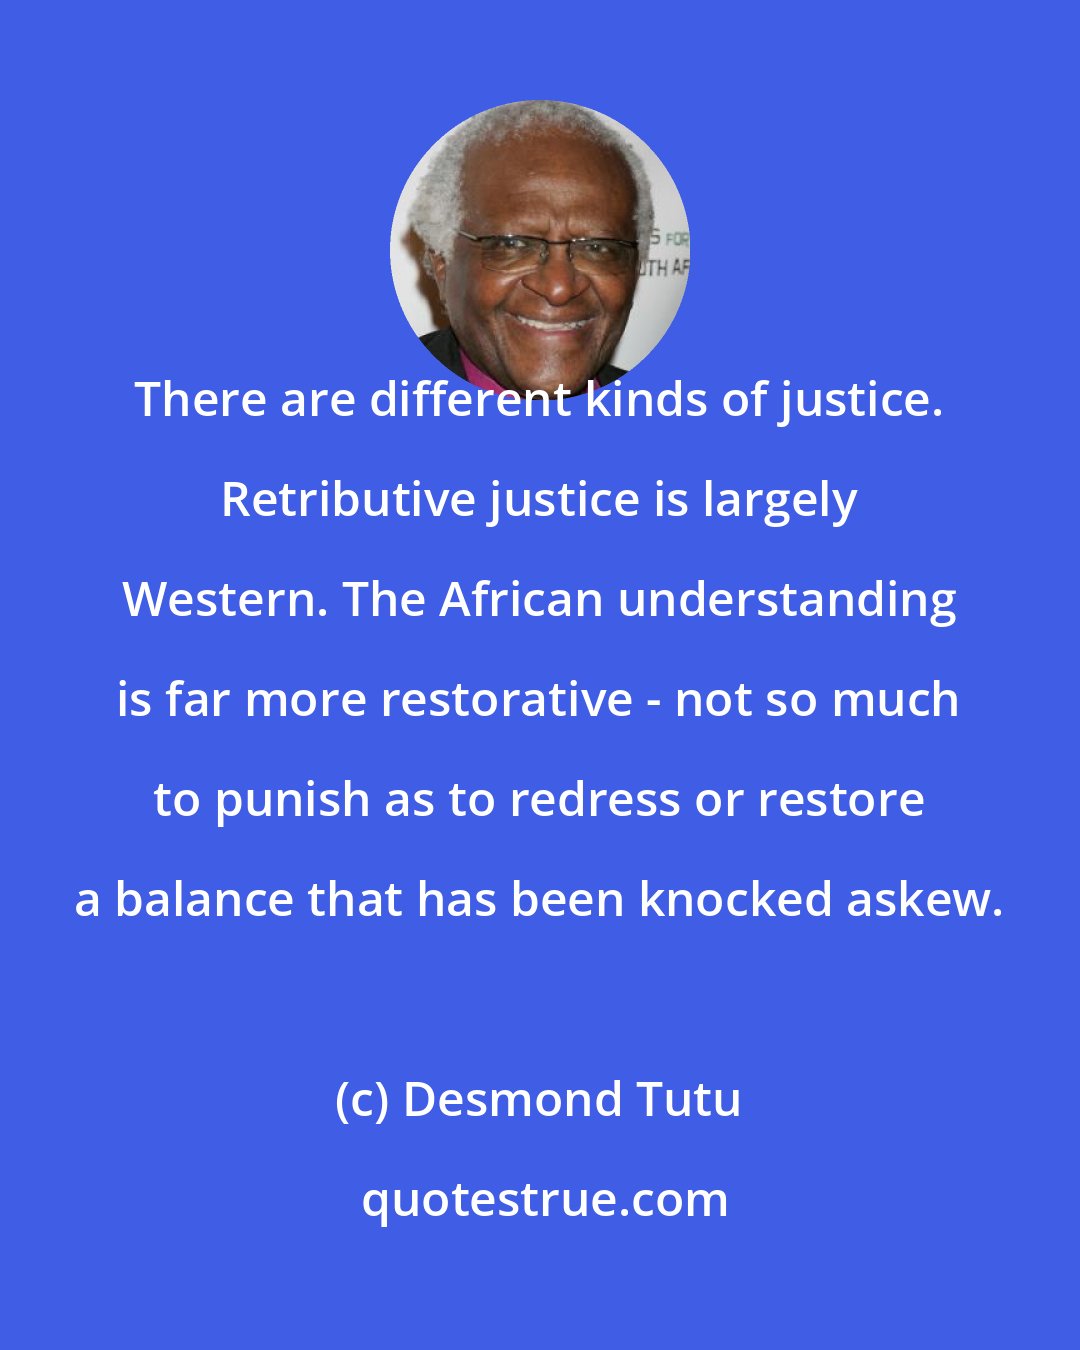 Desmond Tutu: There are different kinds of justice. Retributive justice is largely Western. The African understanding is far more restorative - not so much to punish as to redress or restore a balance that has been knocked askew.